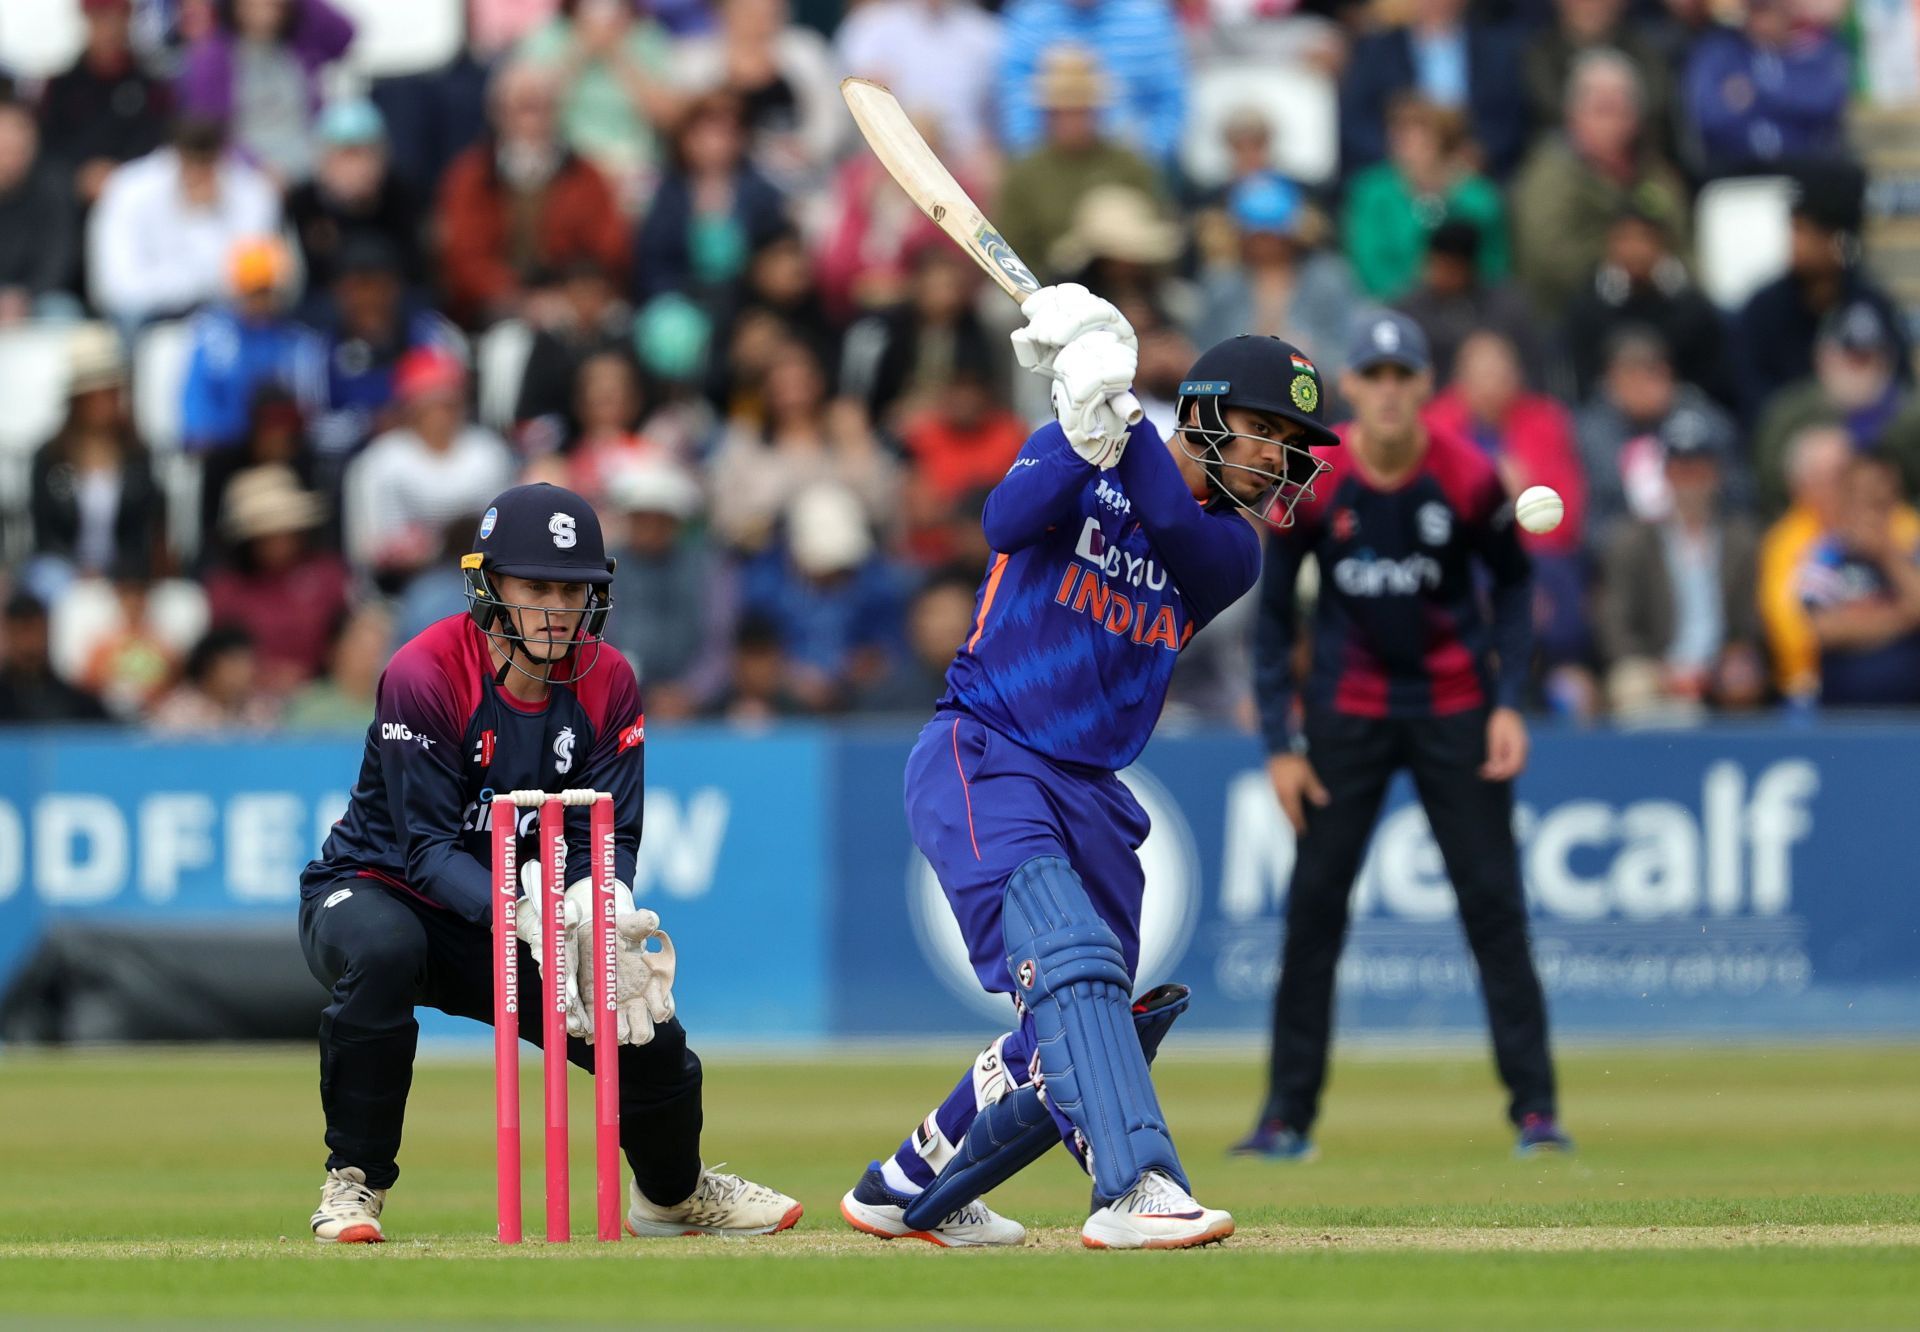 Ishan Kishan was part of India&#039;s squad for the ICC T20 World Cup 2021. (Image: Getty)